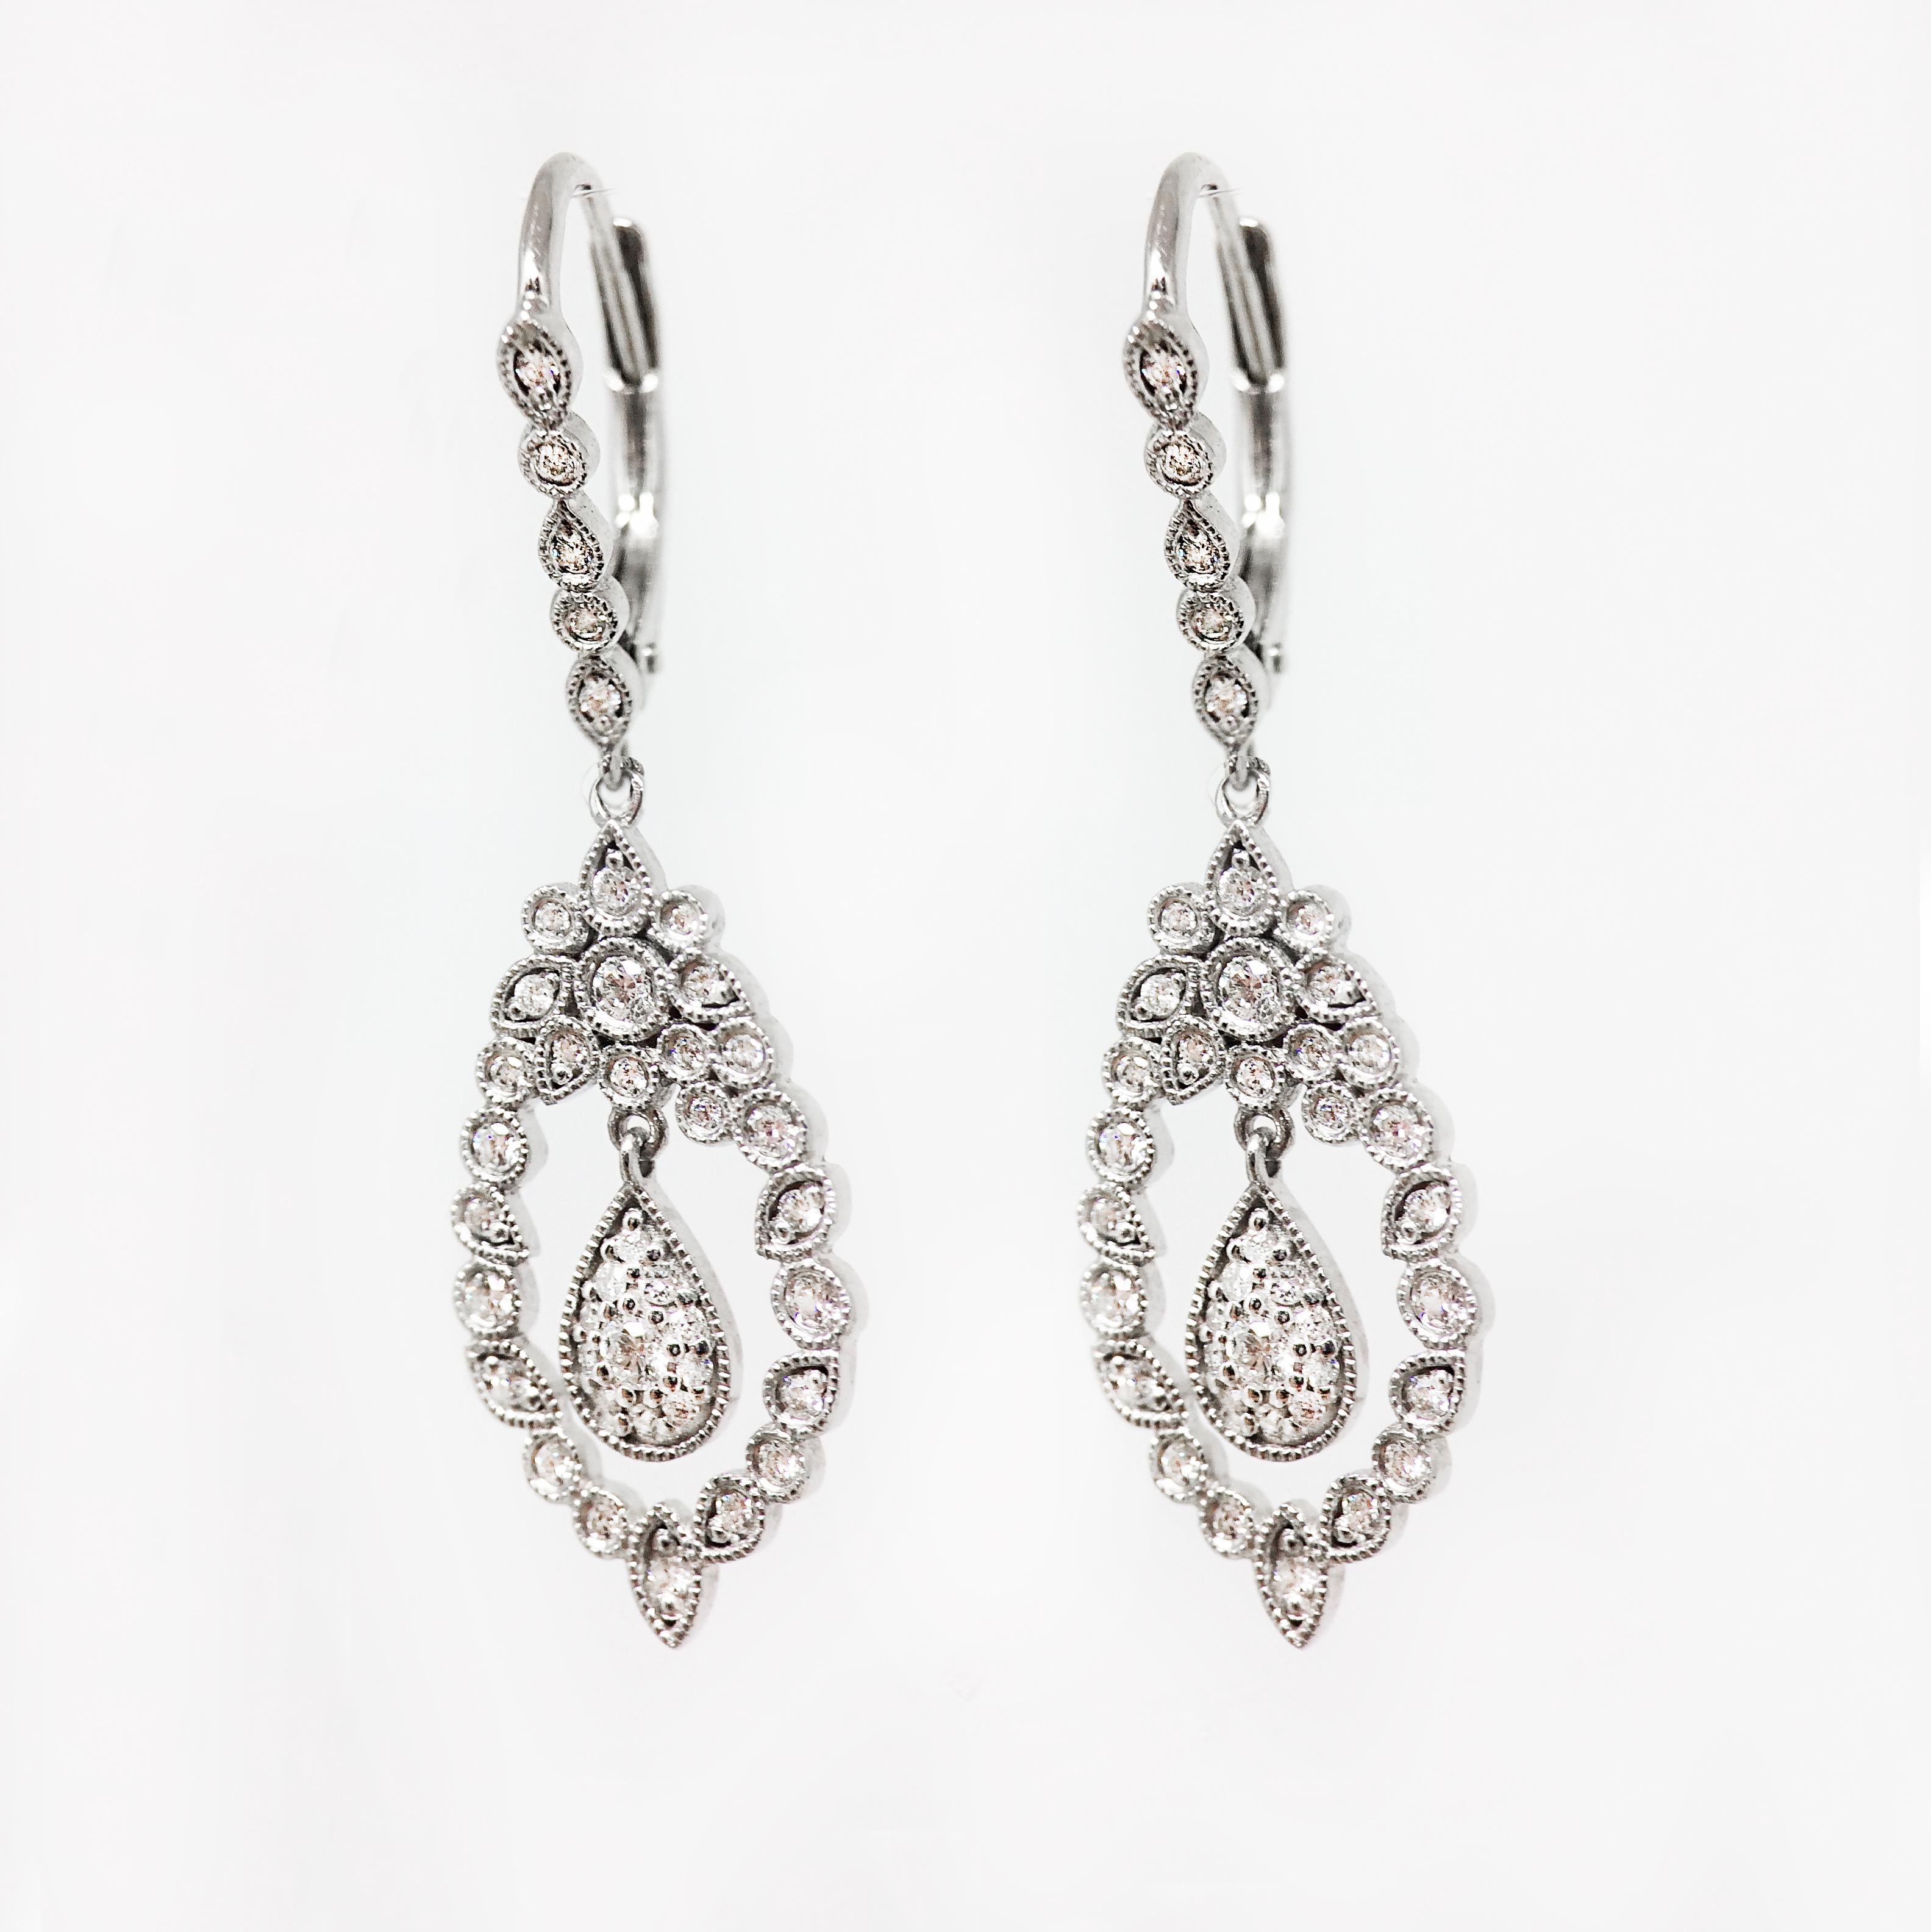 By Stone Paris

Dangle earrings
18-kt white gold 3.20g
82 GVS white diamonds 0.43 ct
Dormeuse system - Length : 2.74 cm
Size of the pattern : 0.94 x 1.74 cm

This jewel is also available in pink gold, black gold, and yellow gold.
For more